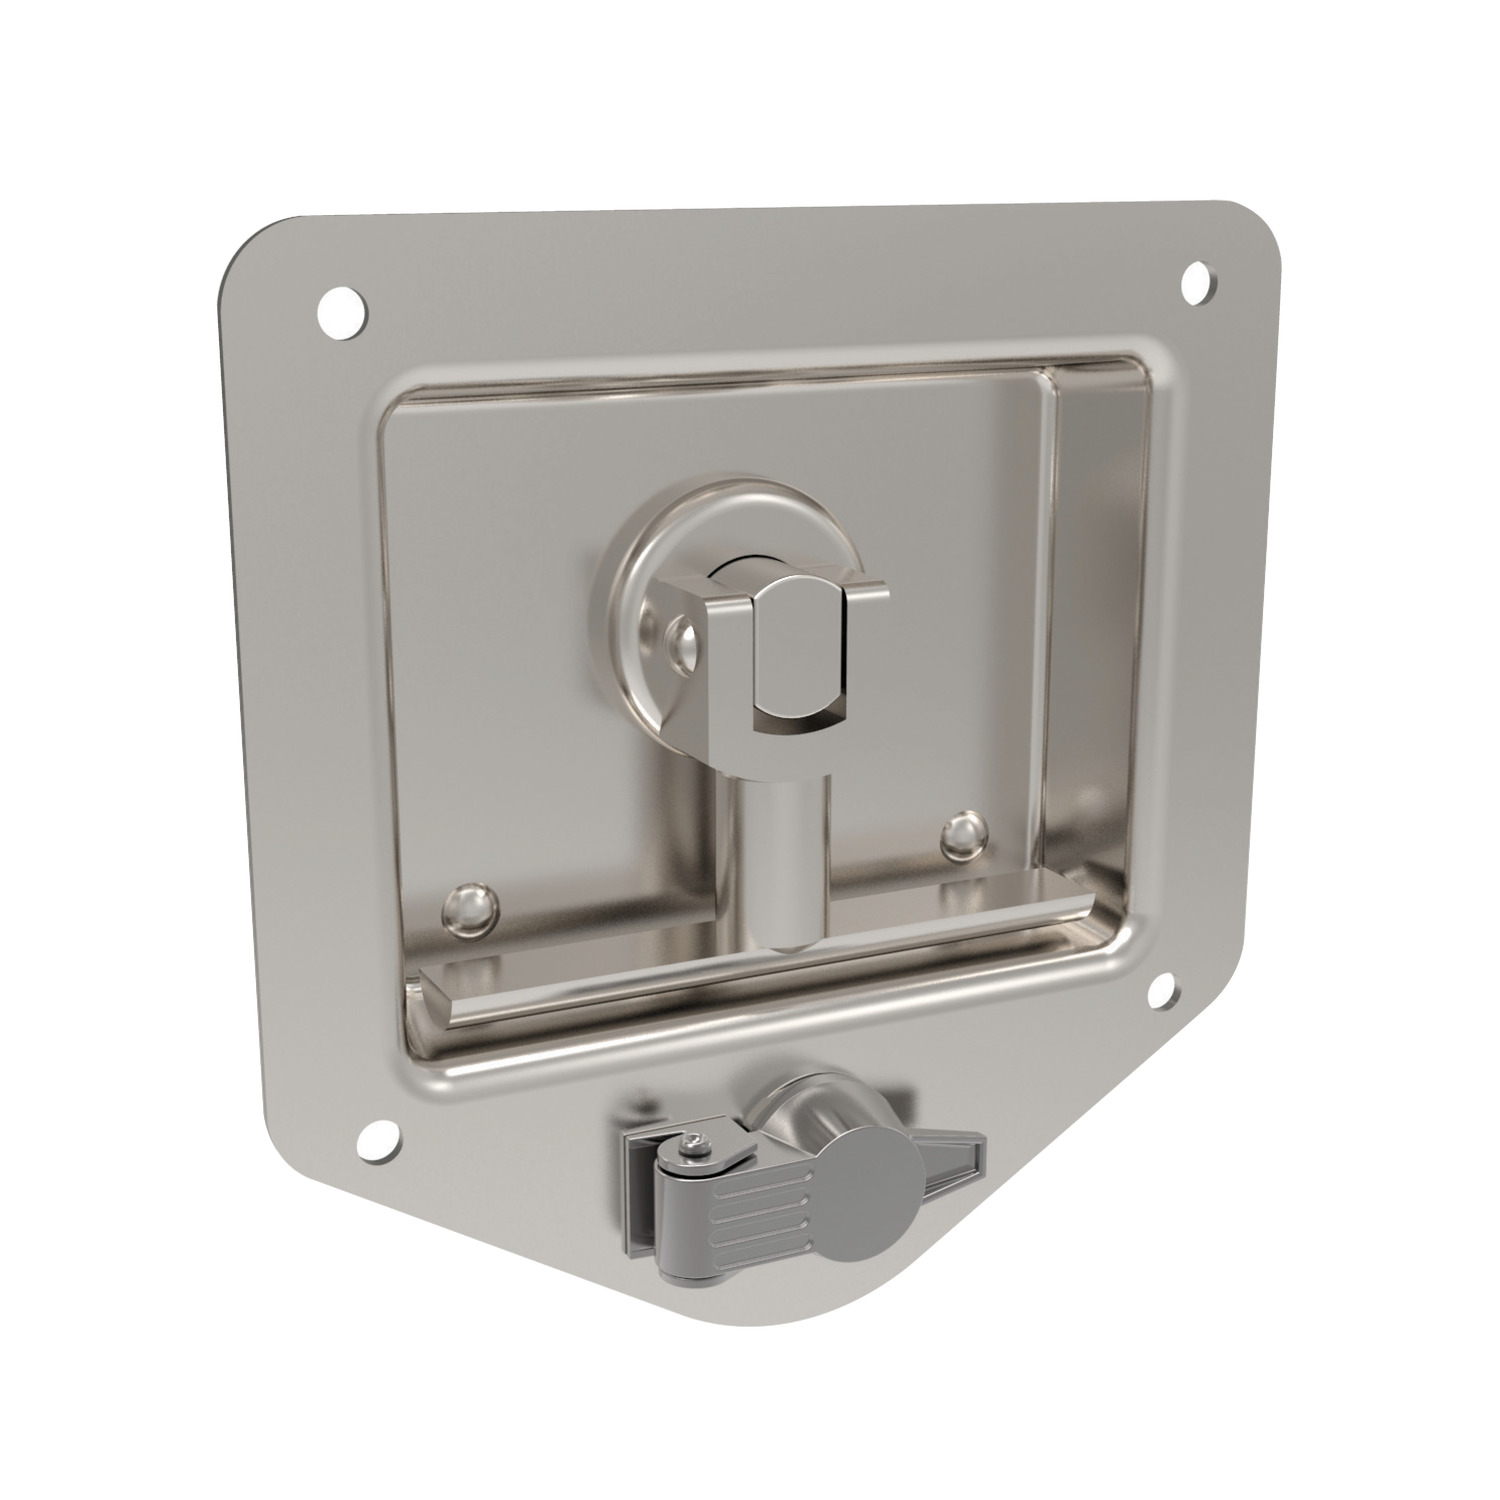 Product B4584, Cam Latch - Flush T-handle - Rod Control vertical - heavy duty- fixed grip - standard cylinder lock - stainless / 